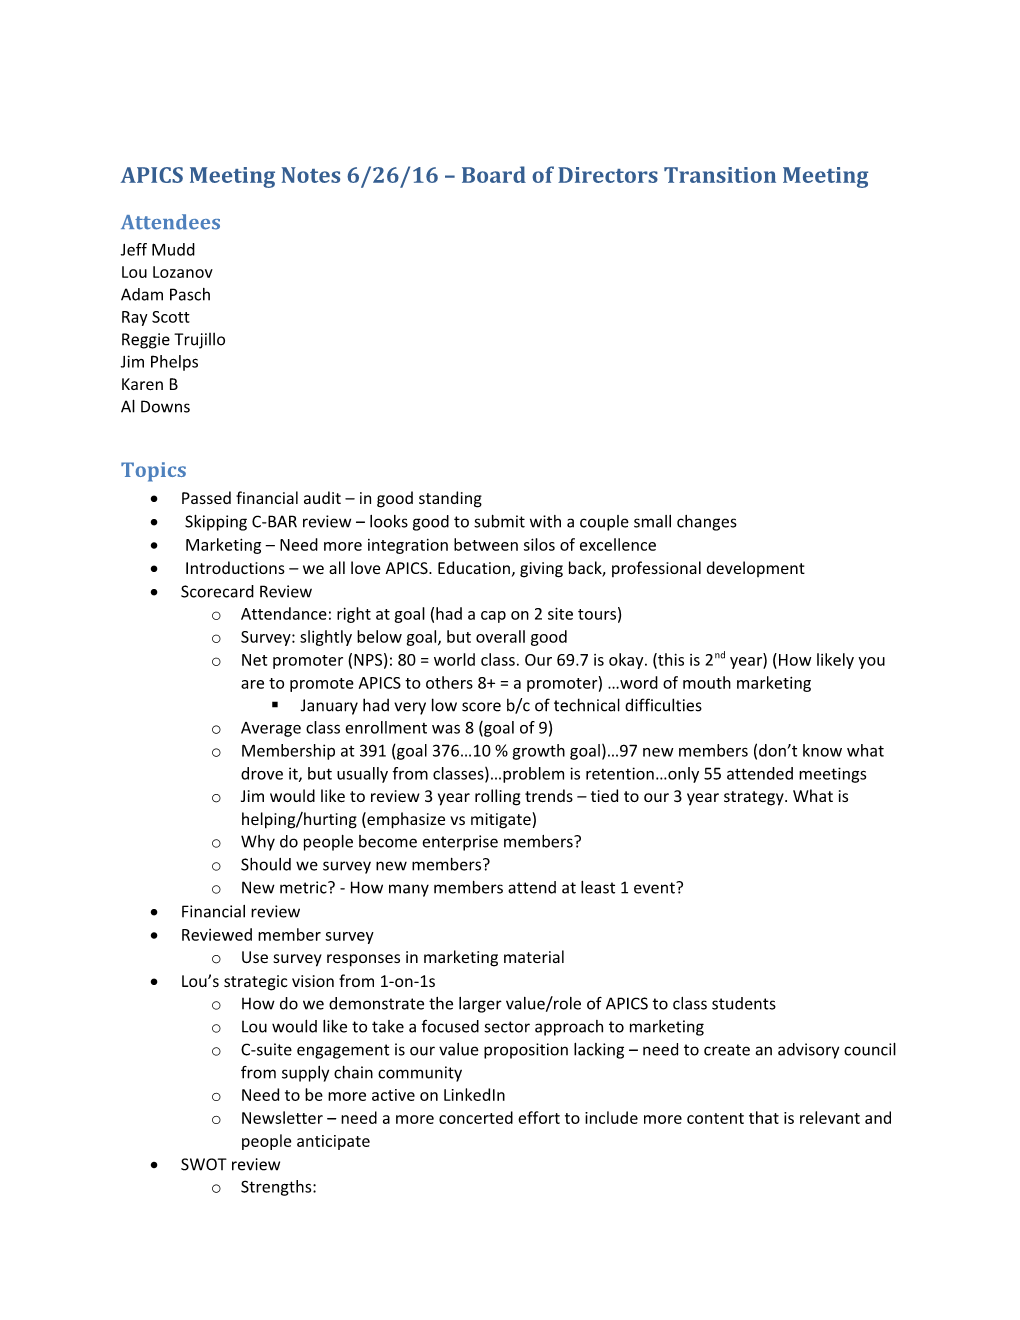 APICS Meeting Notes 6/26/16 Board of Directors Transition Meeting